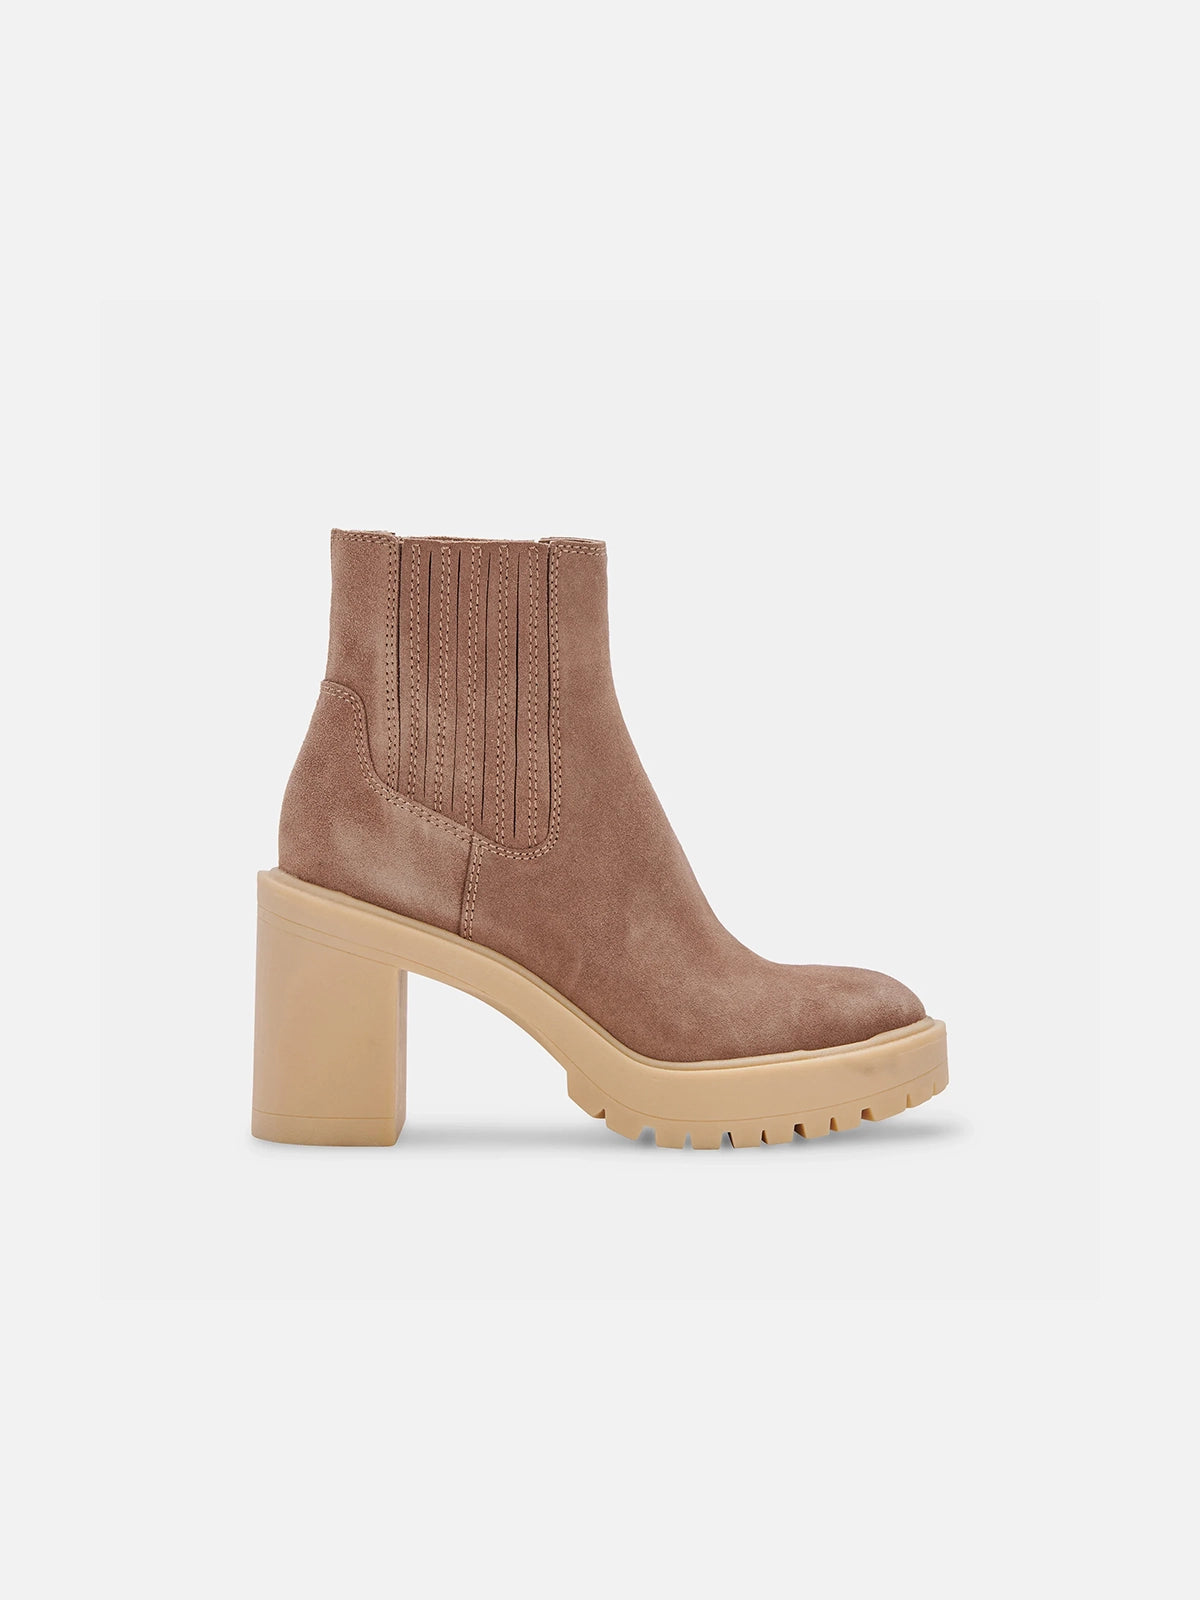 dolce vita caster h2o boots in mushroom suede